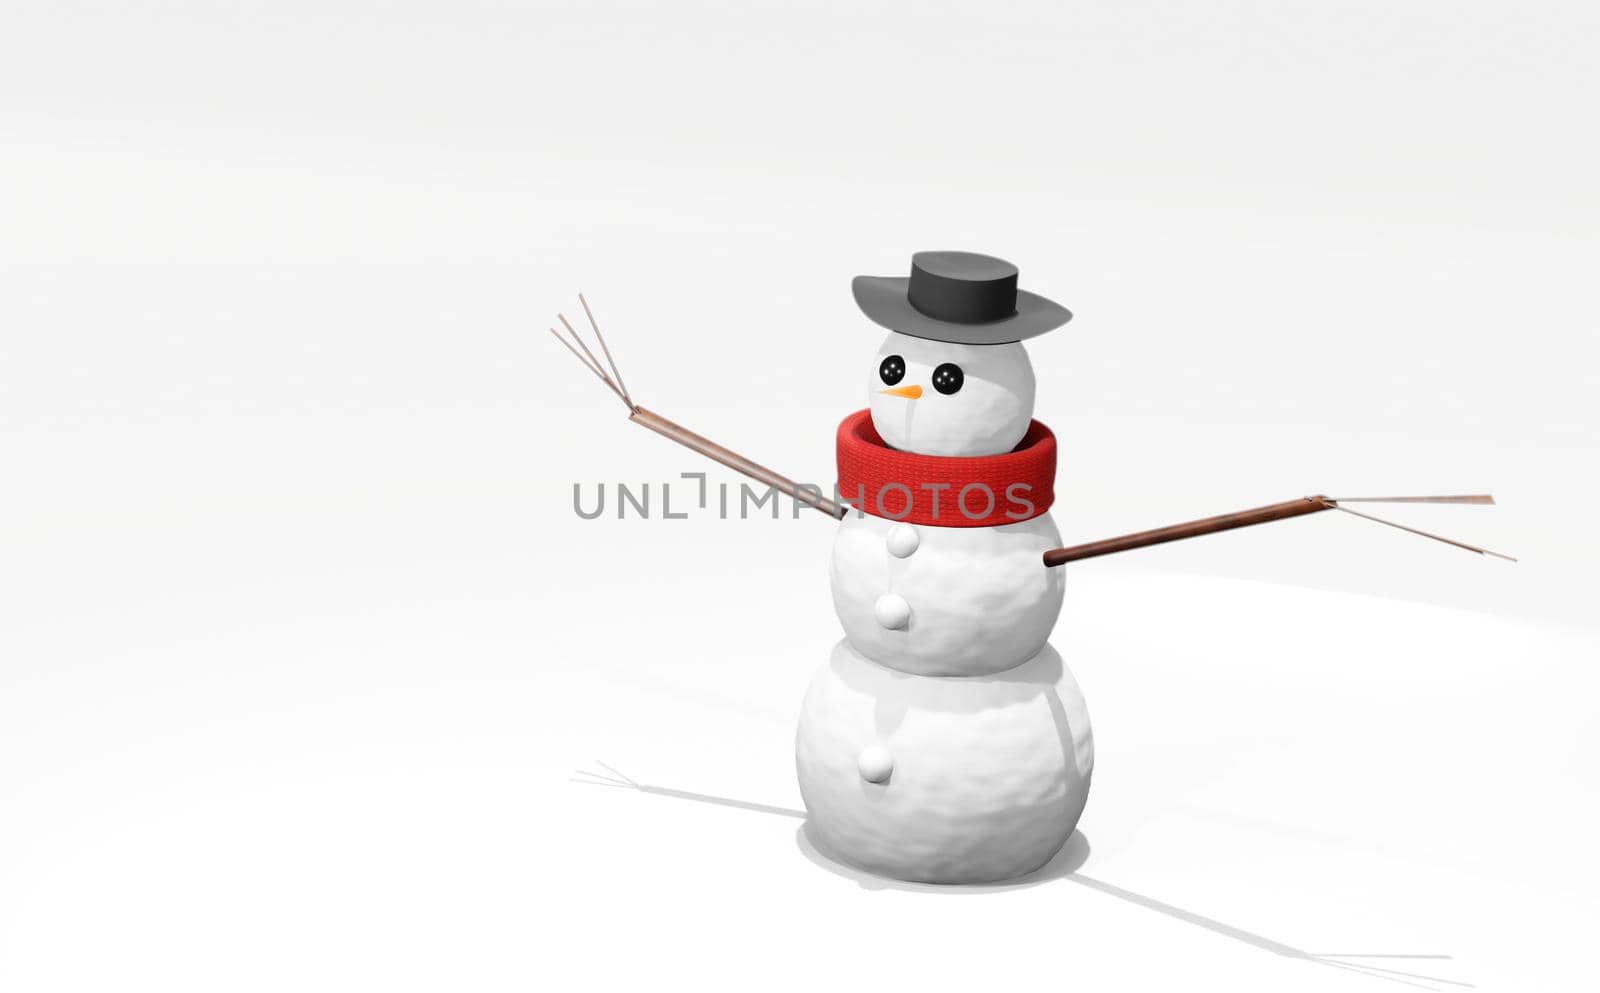 3d render character, cheerful white snowman with knitted hat and scarf, cartoon ilustration isolated on white background.